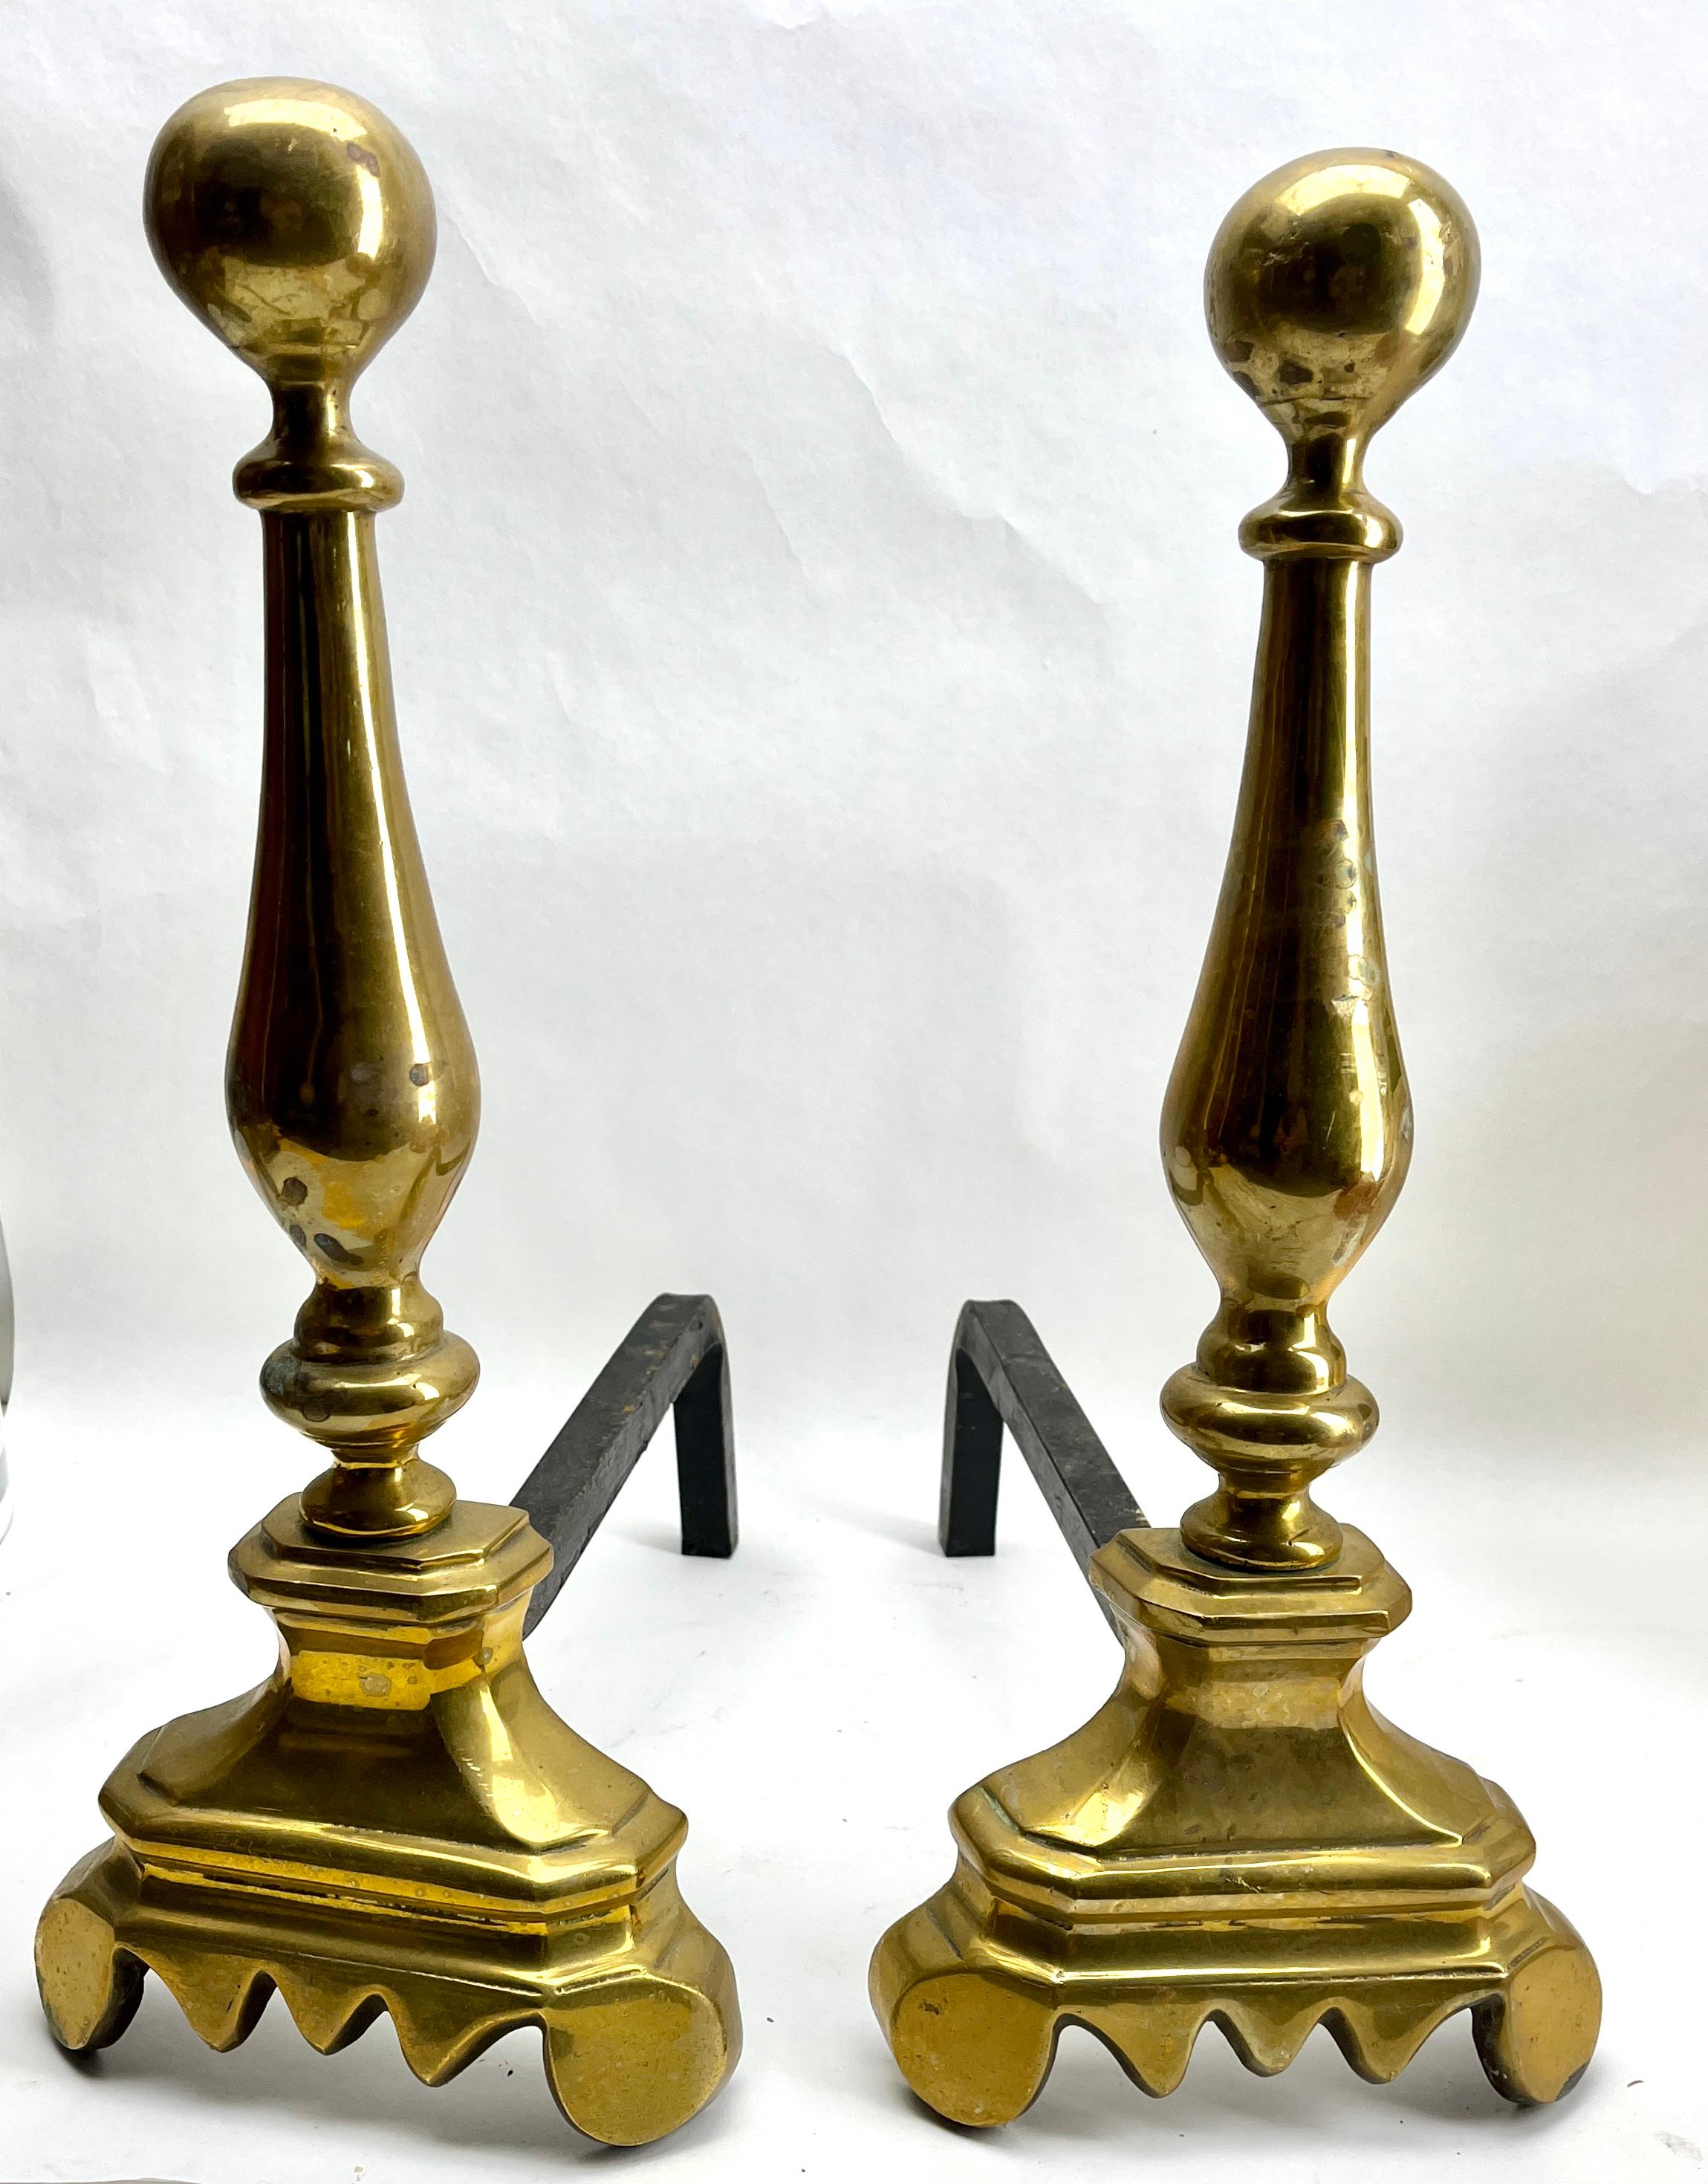 Pair of iron and brass top andirons, circa 1930

Pair wrought iron and brass top andirons and terminating on decorative scrolled stylized legs

We prefer to sell our items in 'uncleaned' condition so that the new owner 
still has the choice to